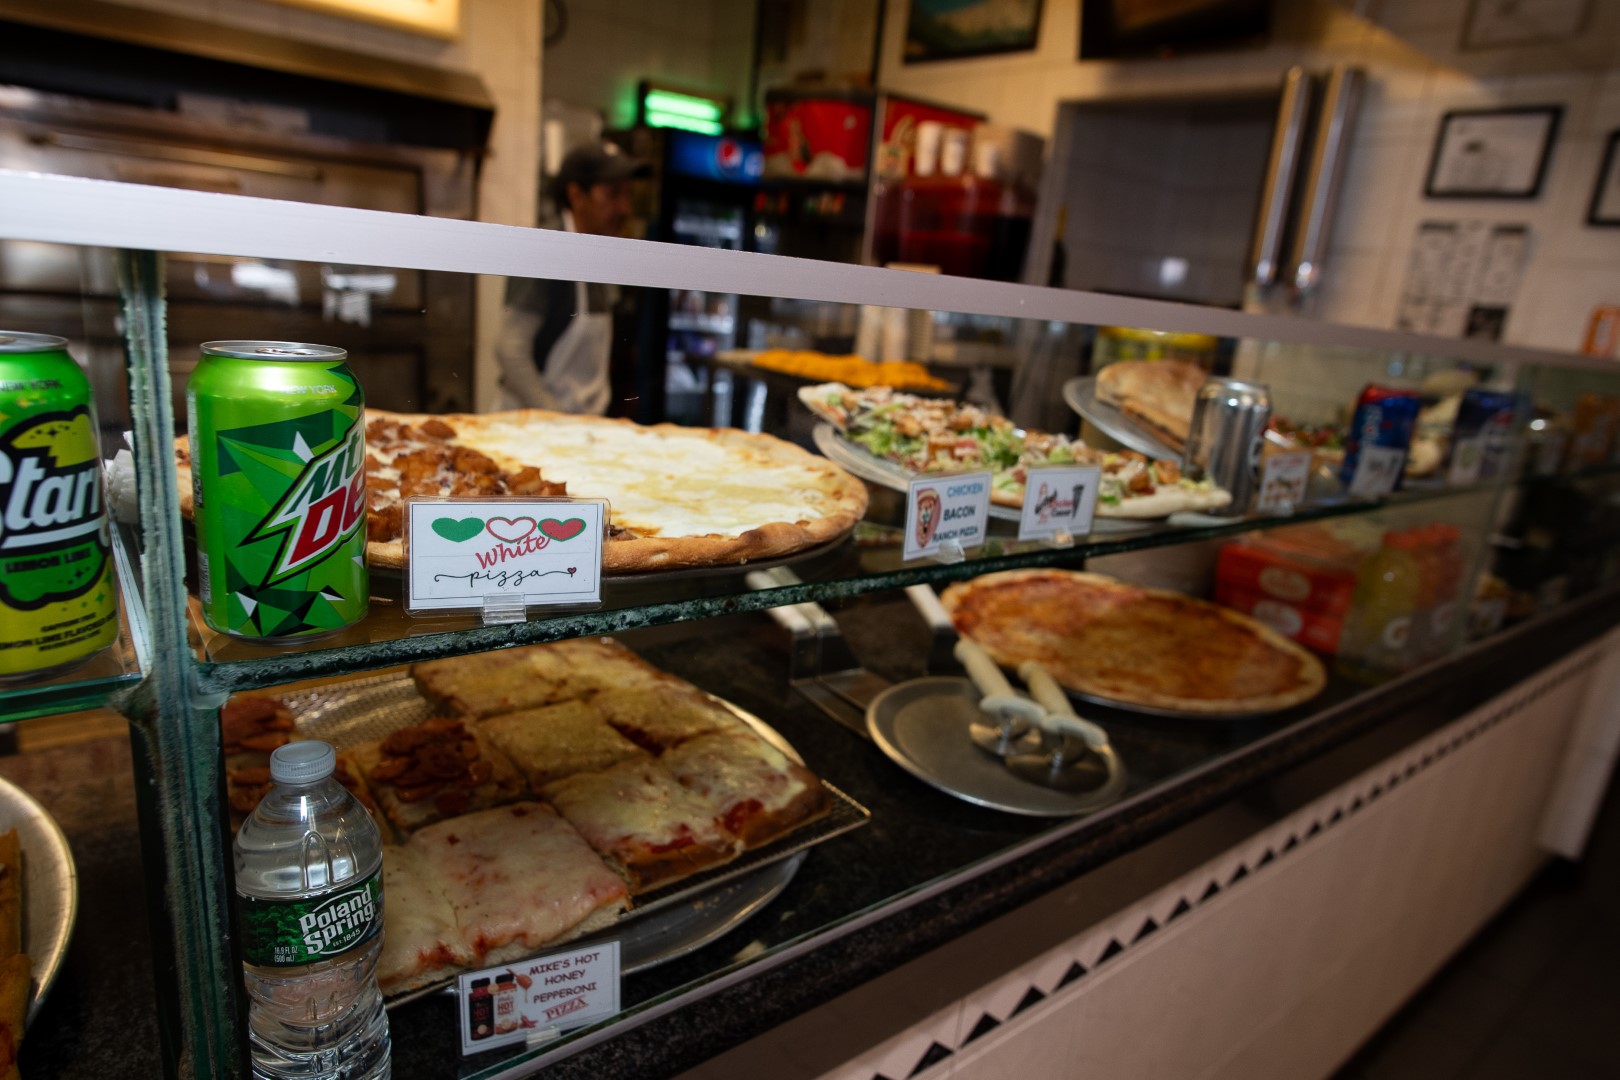 A display case at a pizzeria showcasing various pizza slices, snacks, and beverages. visible are cheese pizza, veggie pizza, and lasagna. staff are seen in the background.